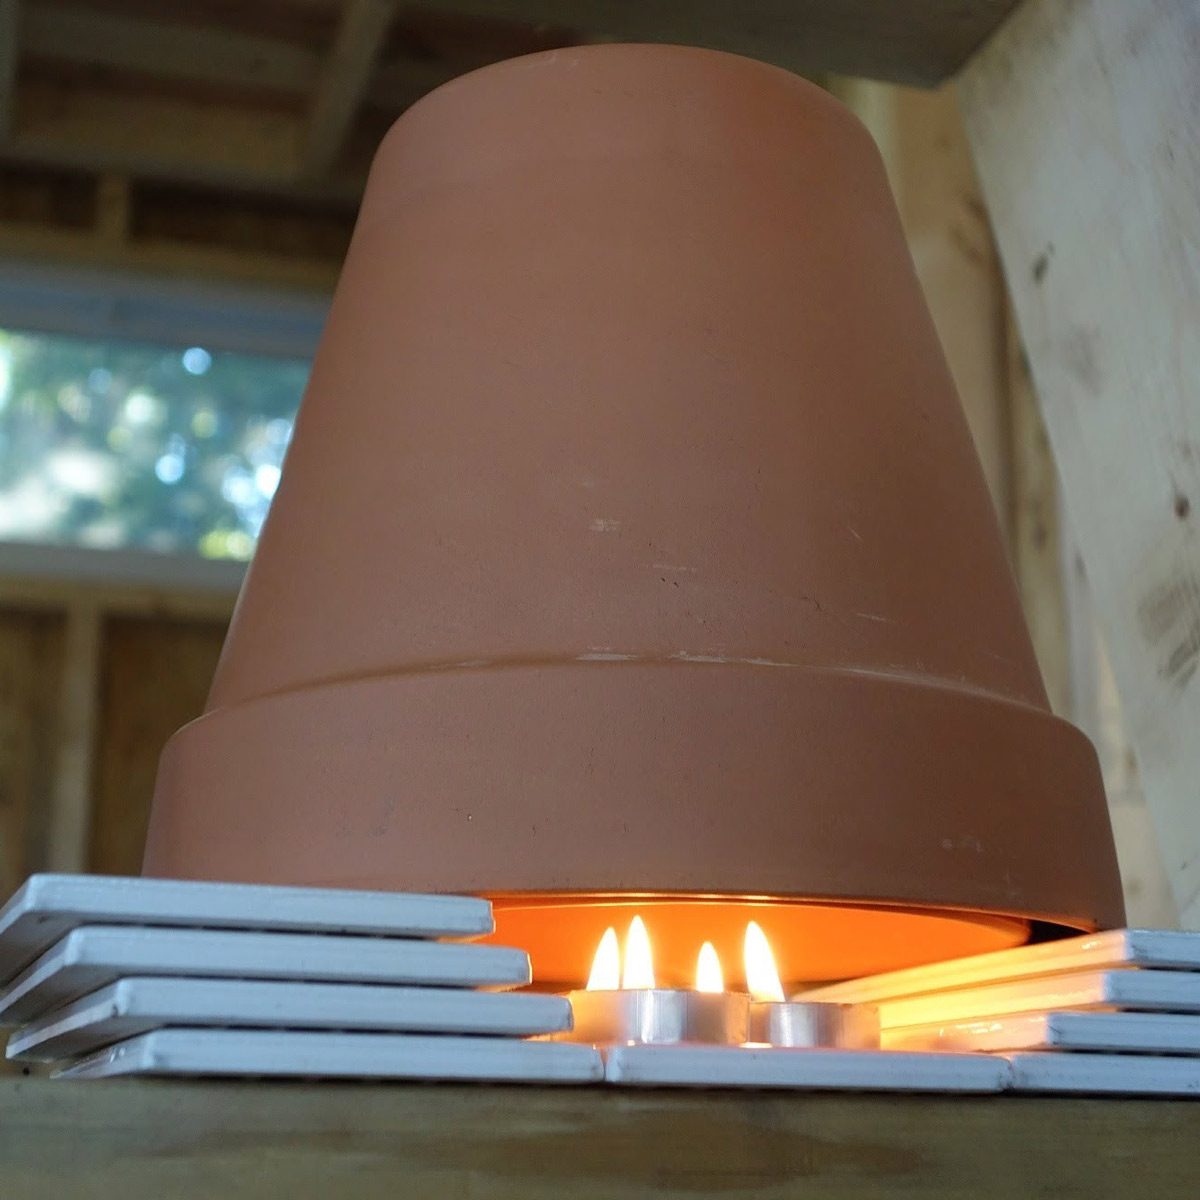 Emergency heat for indoor use, candle brick heater